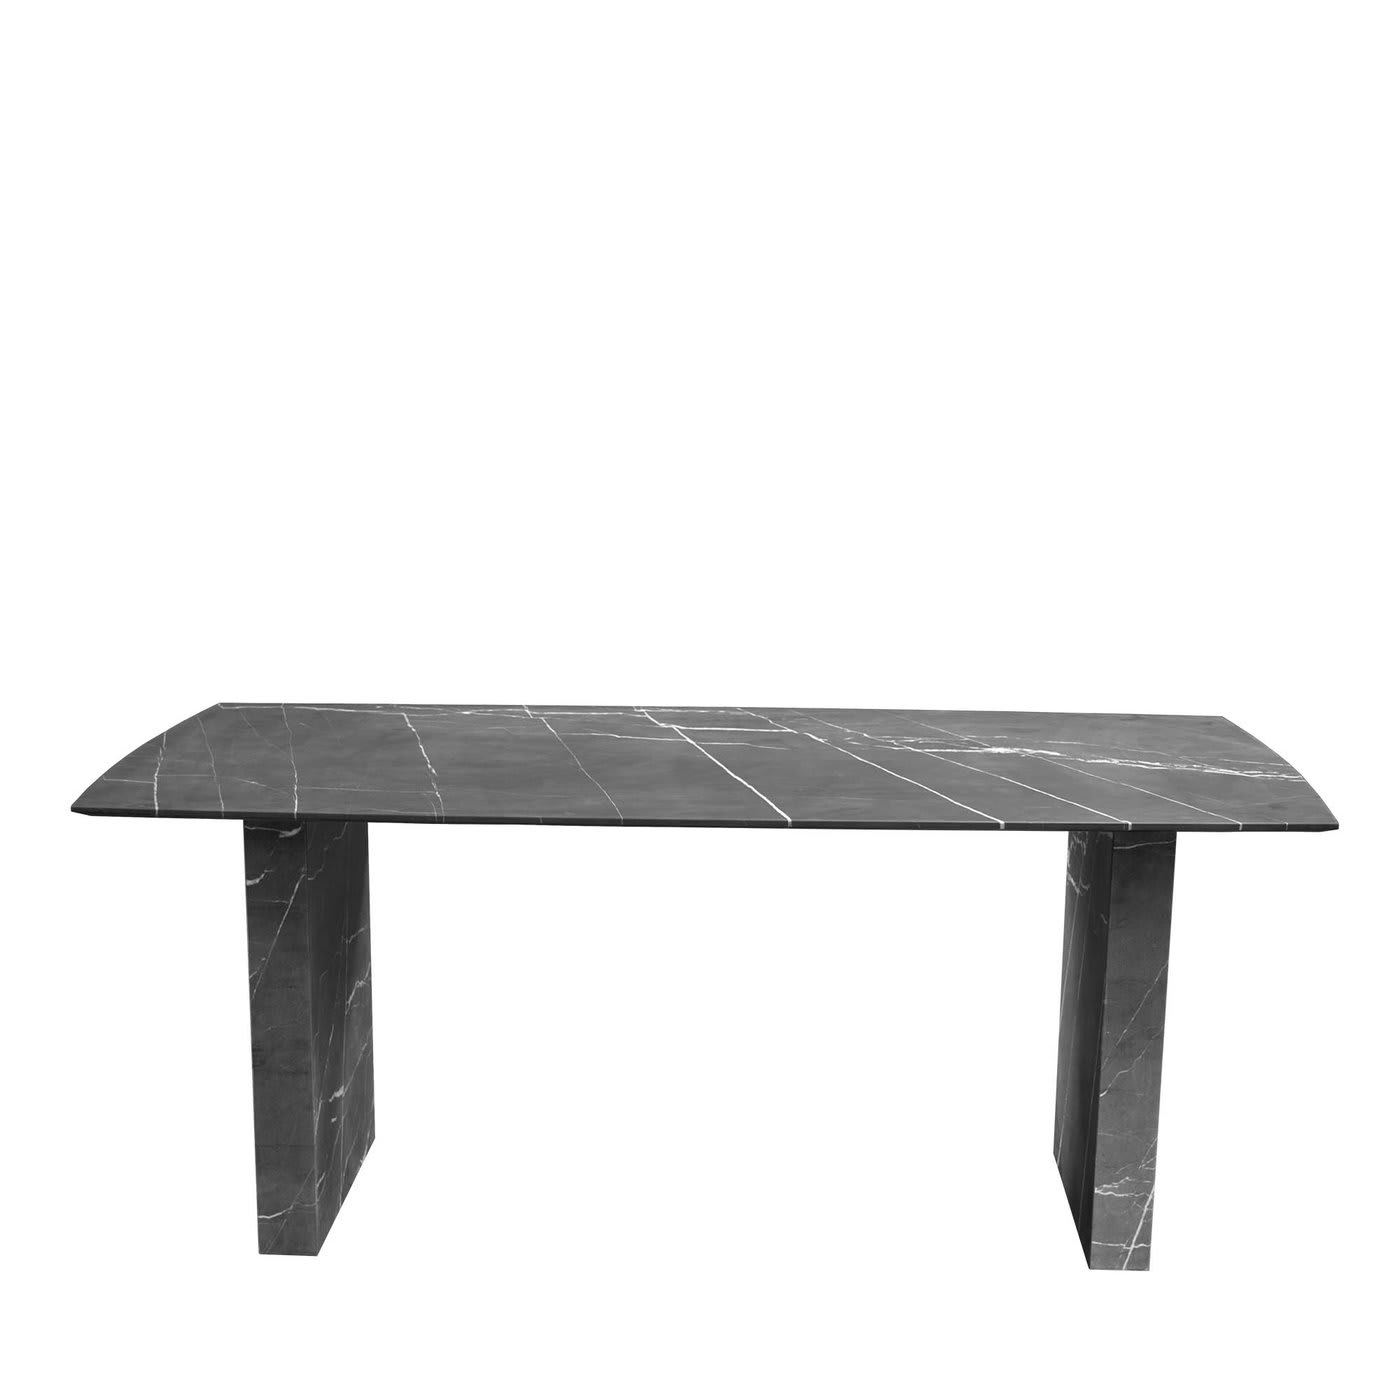 sturdy table